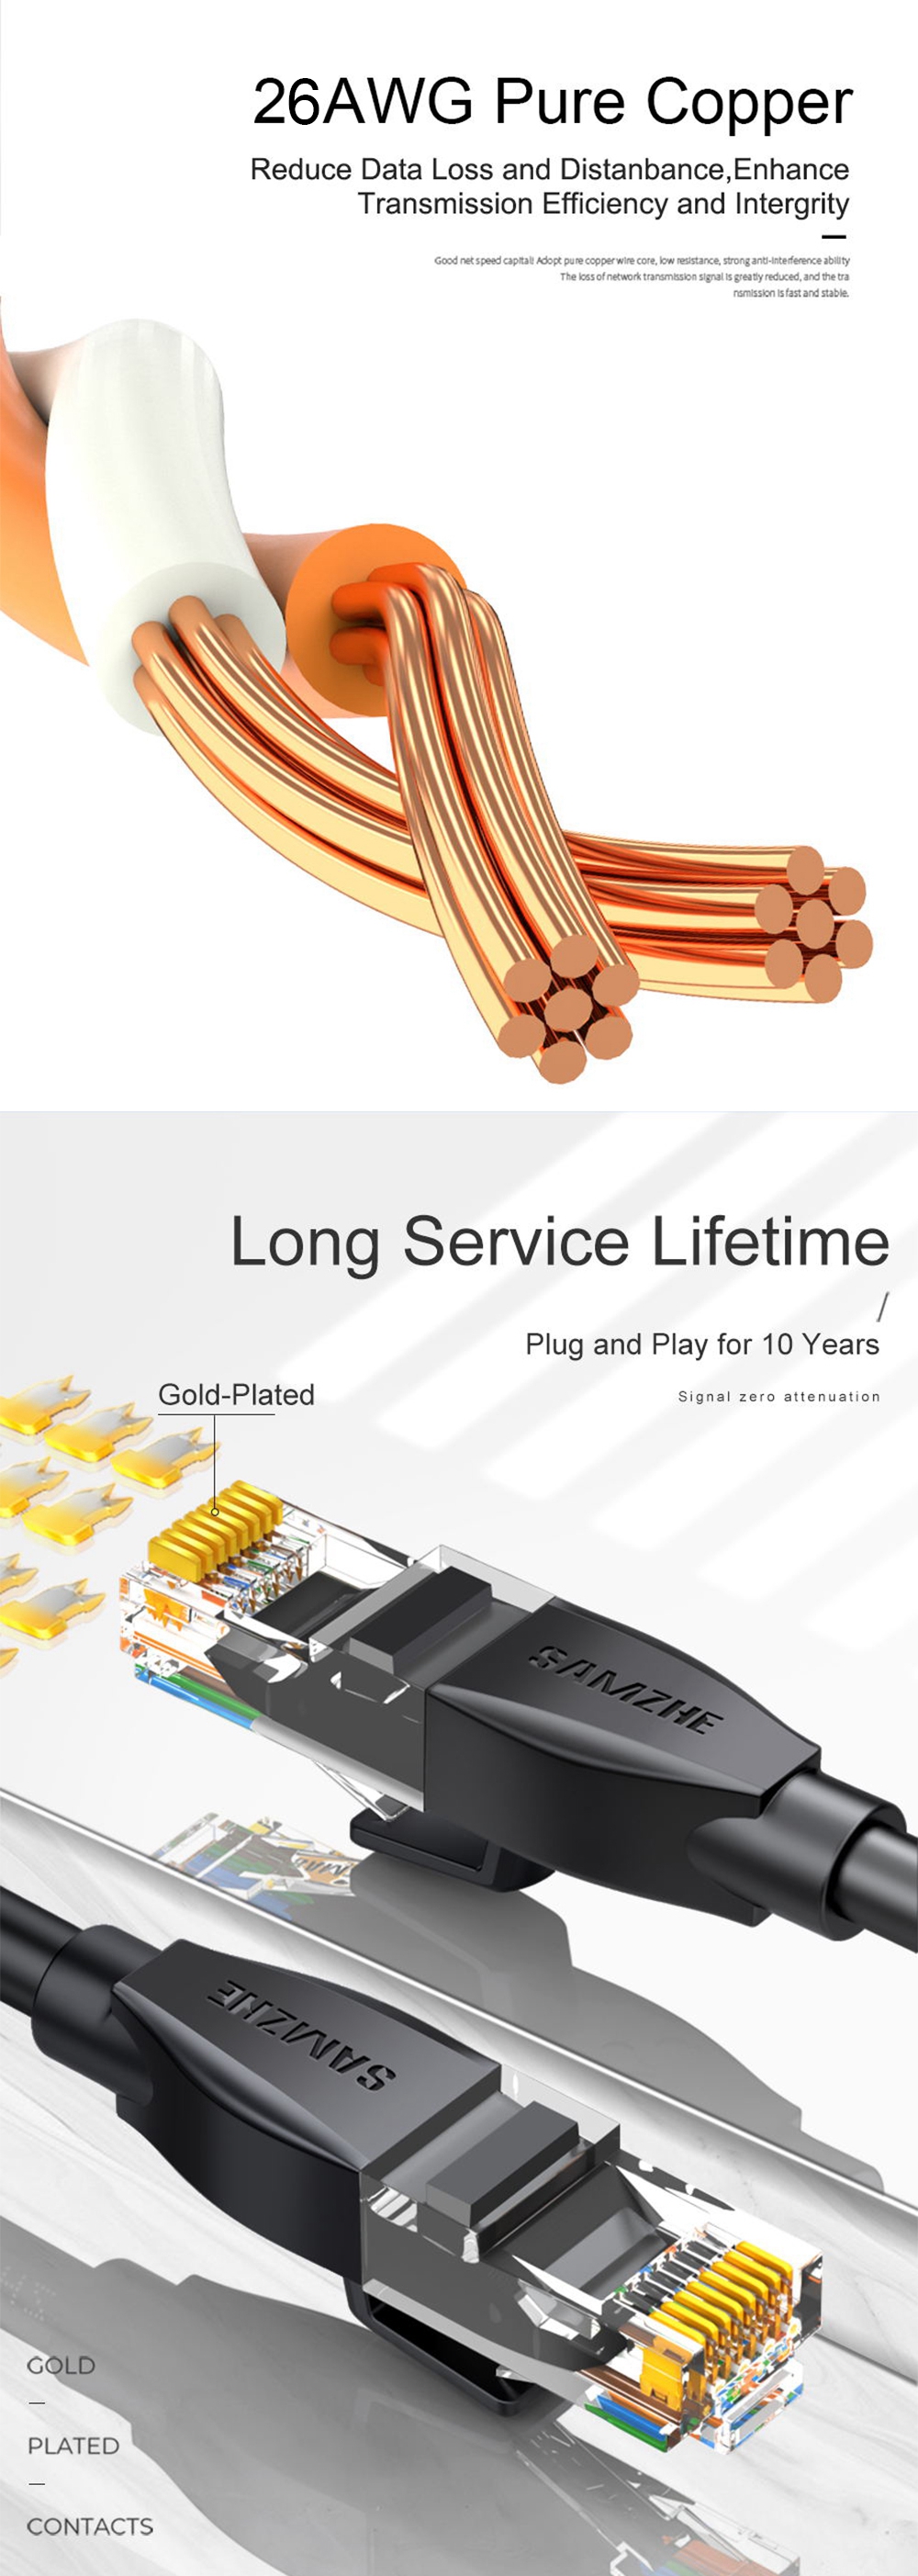 SAMZHE TZB-6015 0.5m / 2m / 10m Networking Cable RJ45 Cat 6 Ethernet Cable Gigabit Network Patch Cord LAN Networking Cable Adapter for PC Computer Oxygen Free Copper Project